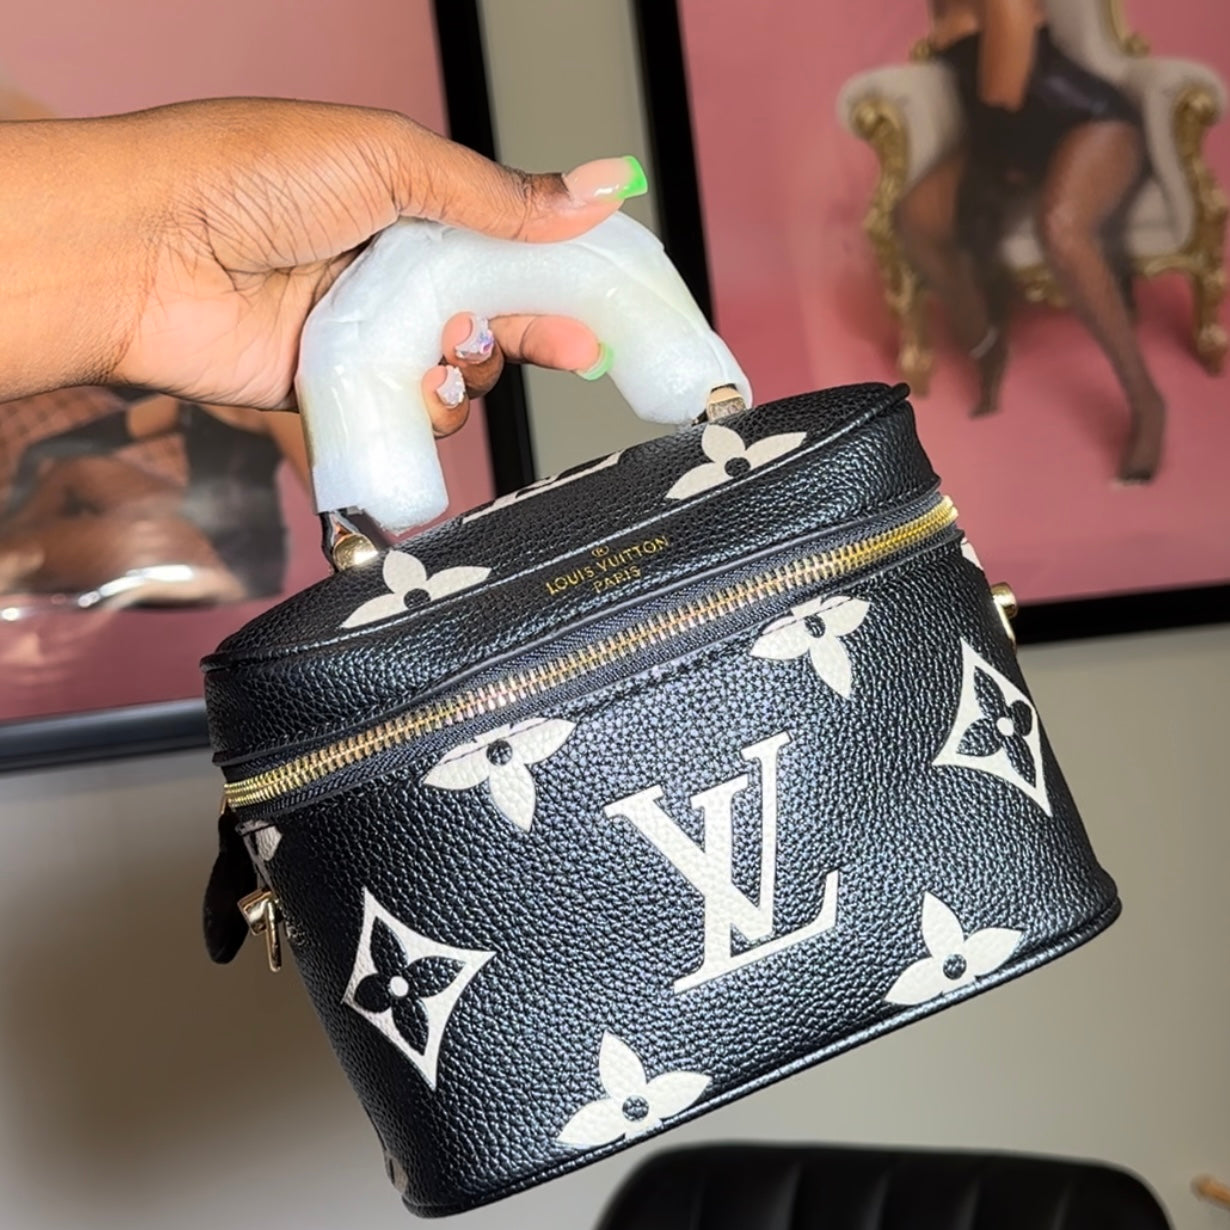 How To Tell If A Louis Vuitton Bag Is Real Or Fake [7 EASY WAYS] - YouTube